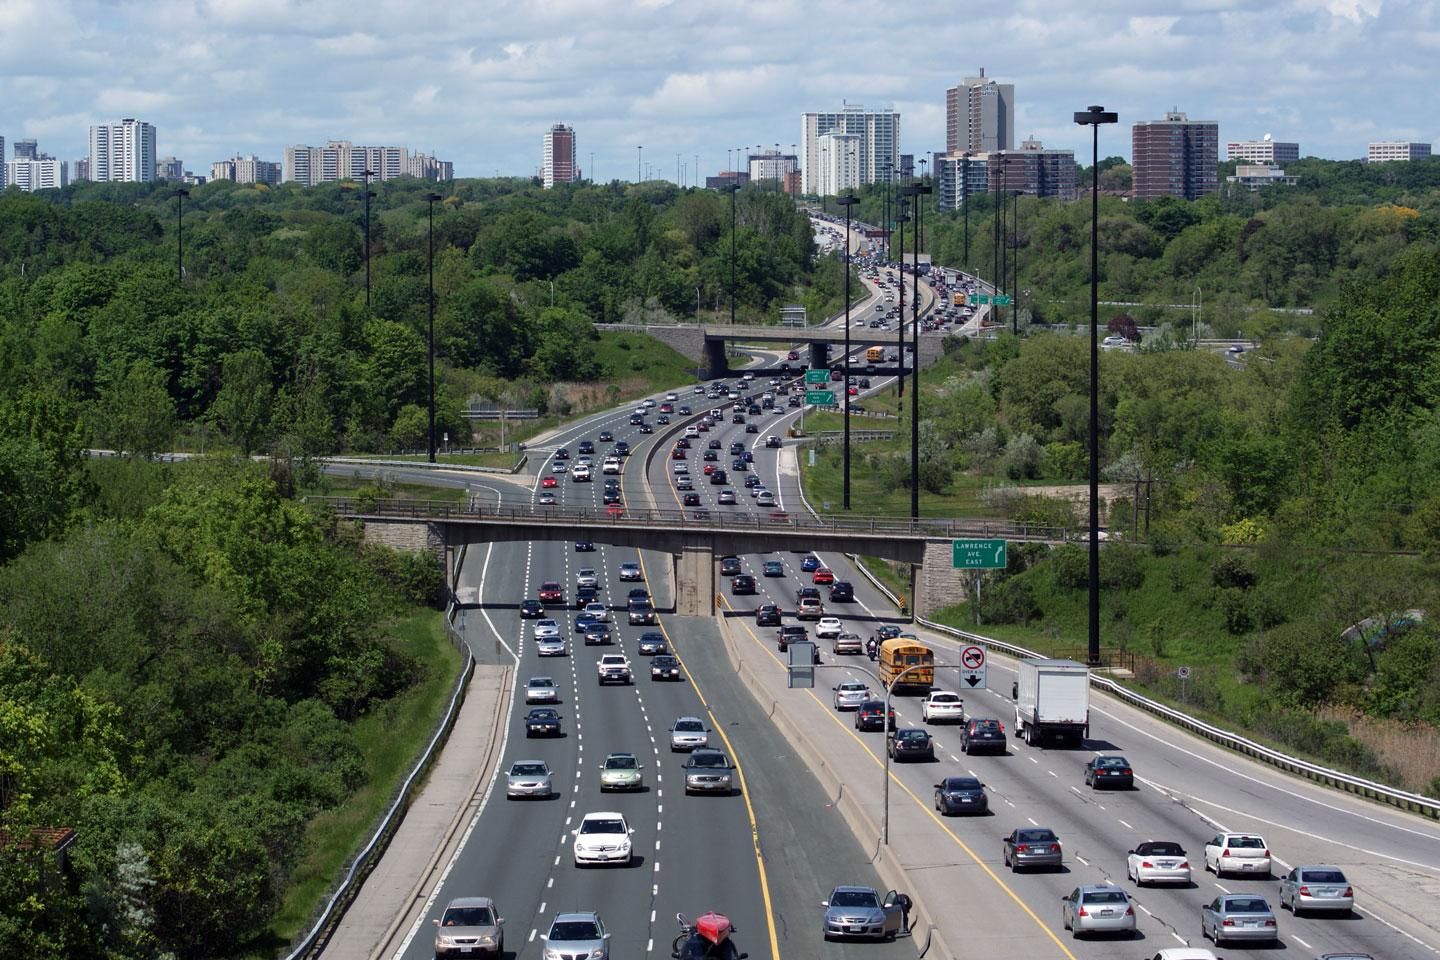 DVP on a clear day